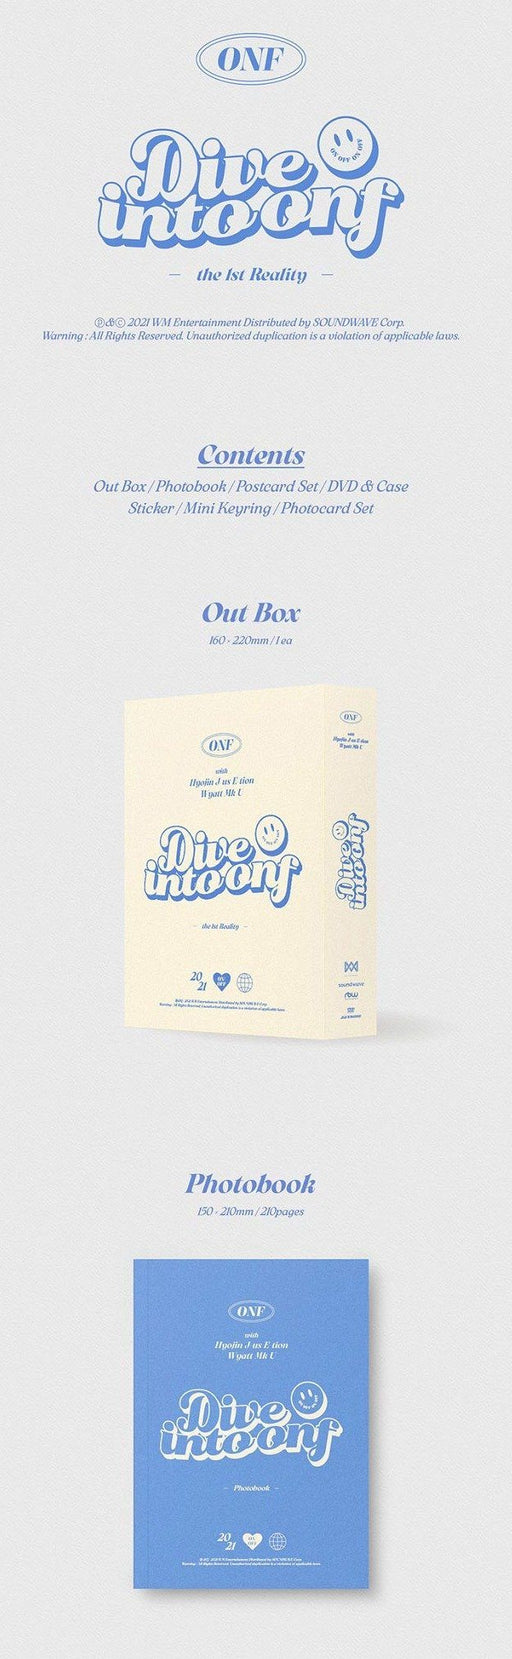 ONF - THE 1ST REALITY [Dive into ONF] DVD